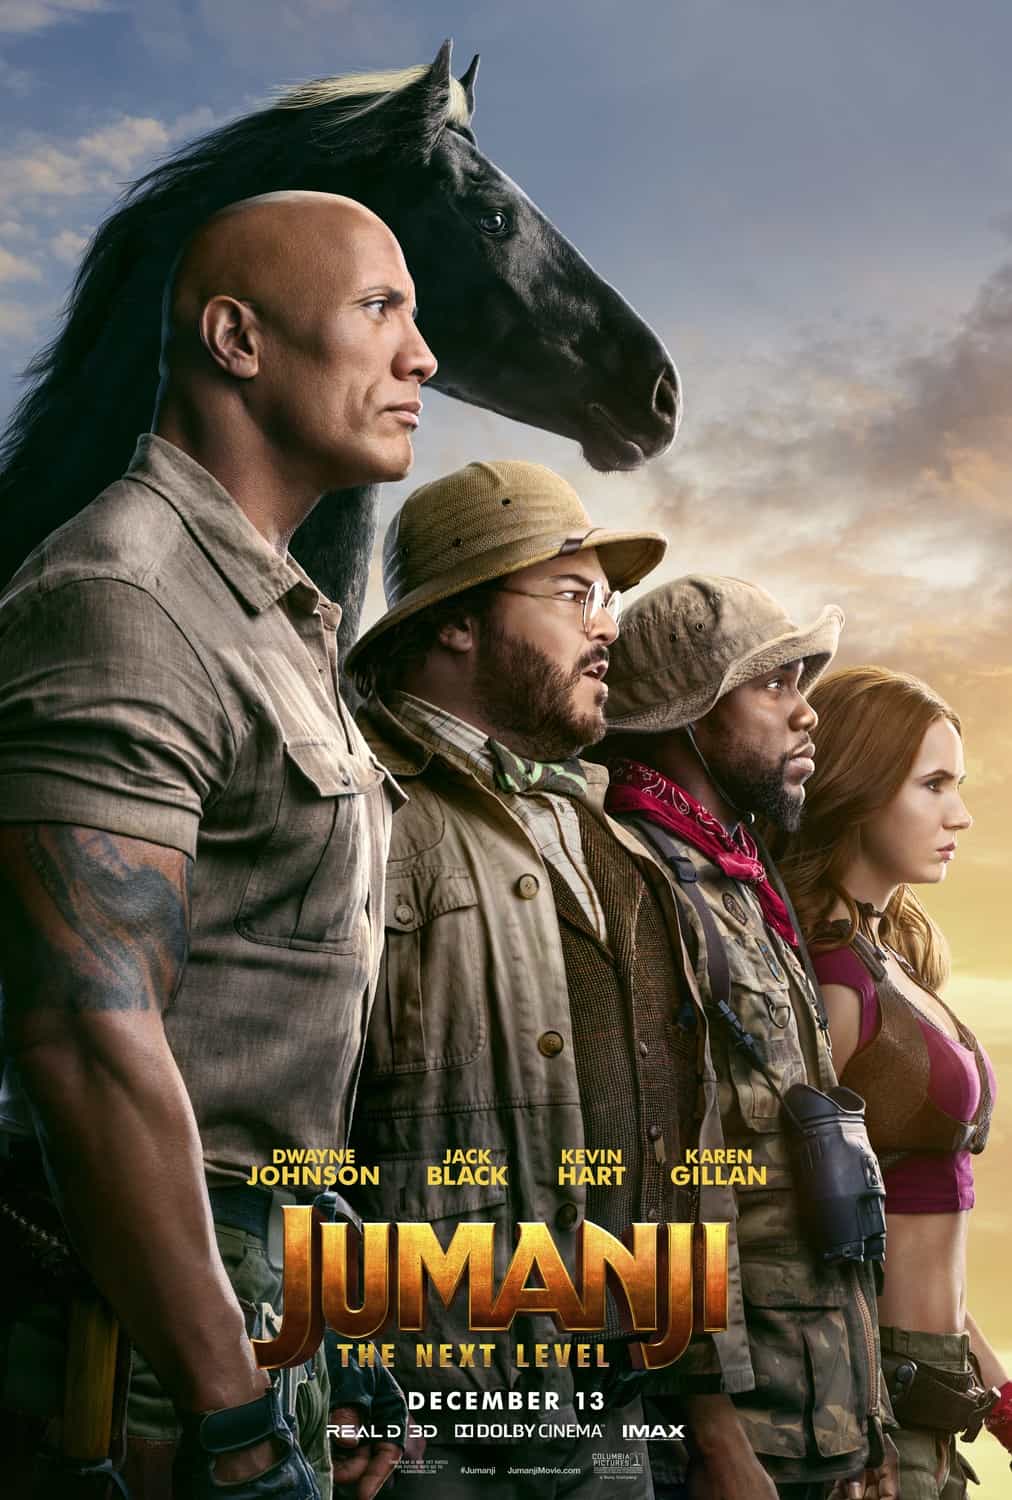 US Box Office Analysis 13 - 15 December 2019:  Jumanji powers to the top on its debut with Richard Jewell and Black Christmas also high new entries